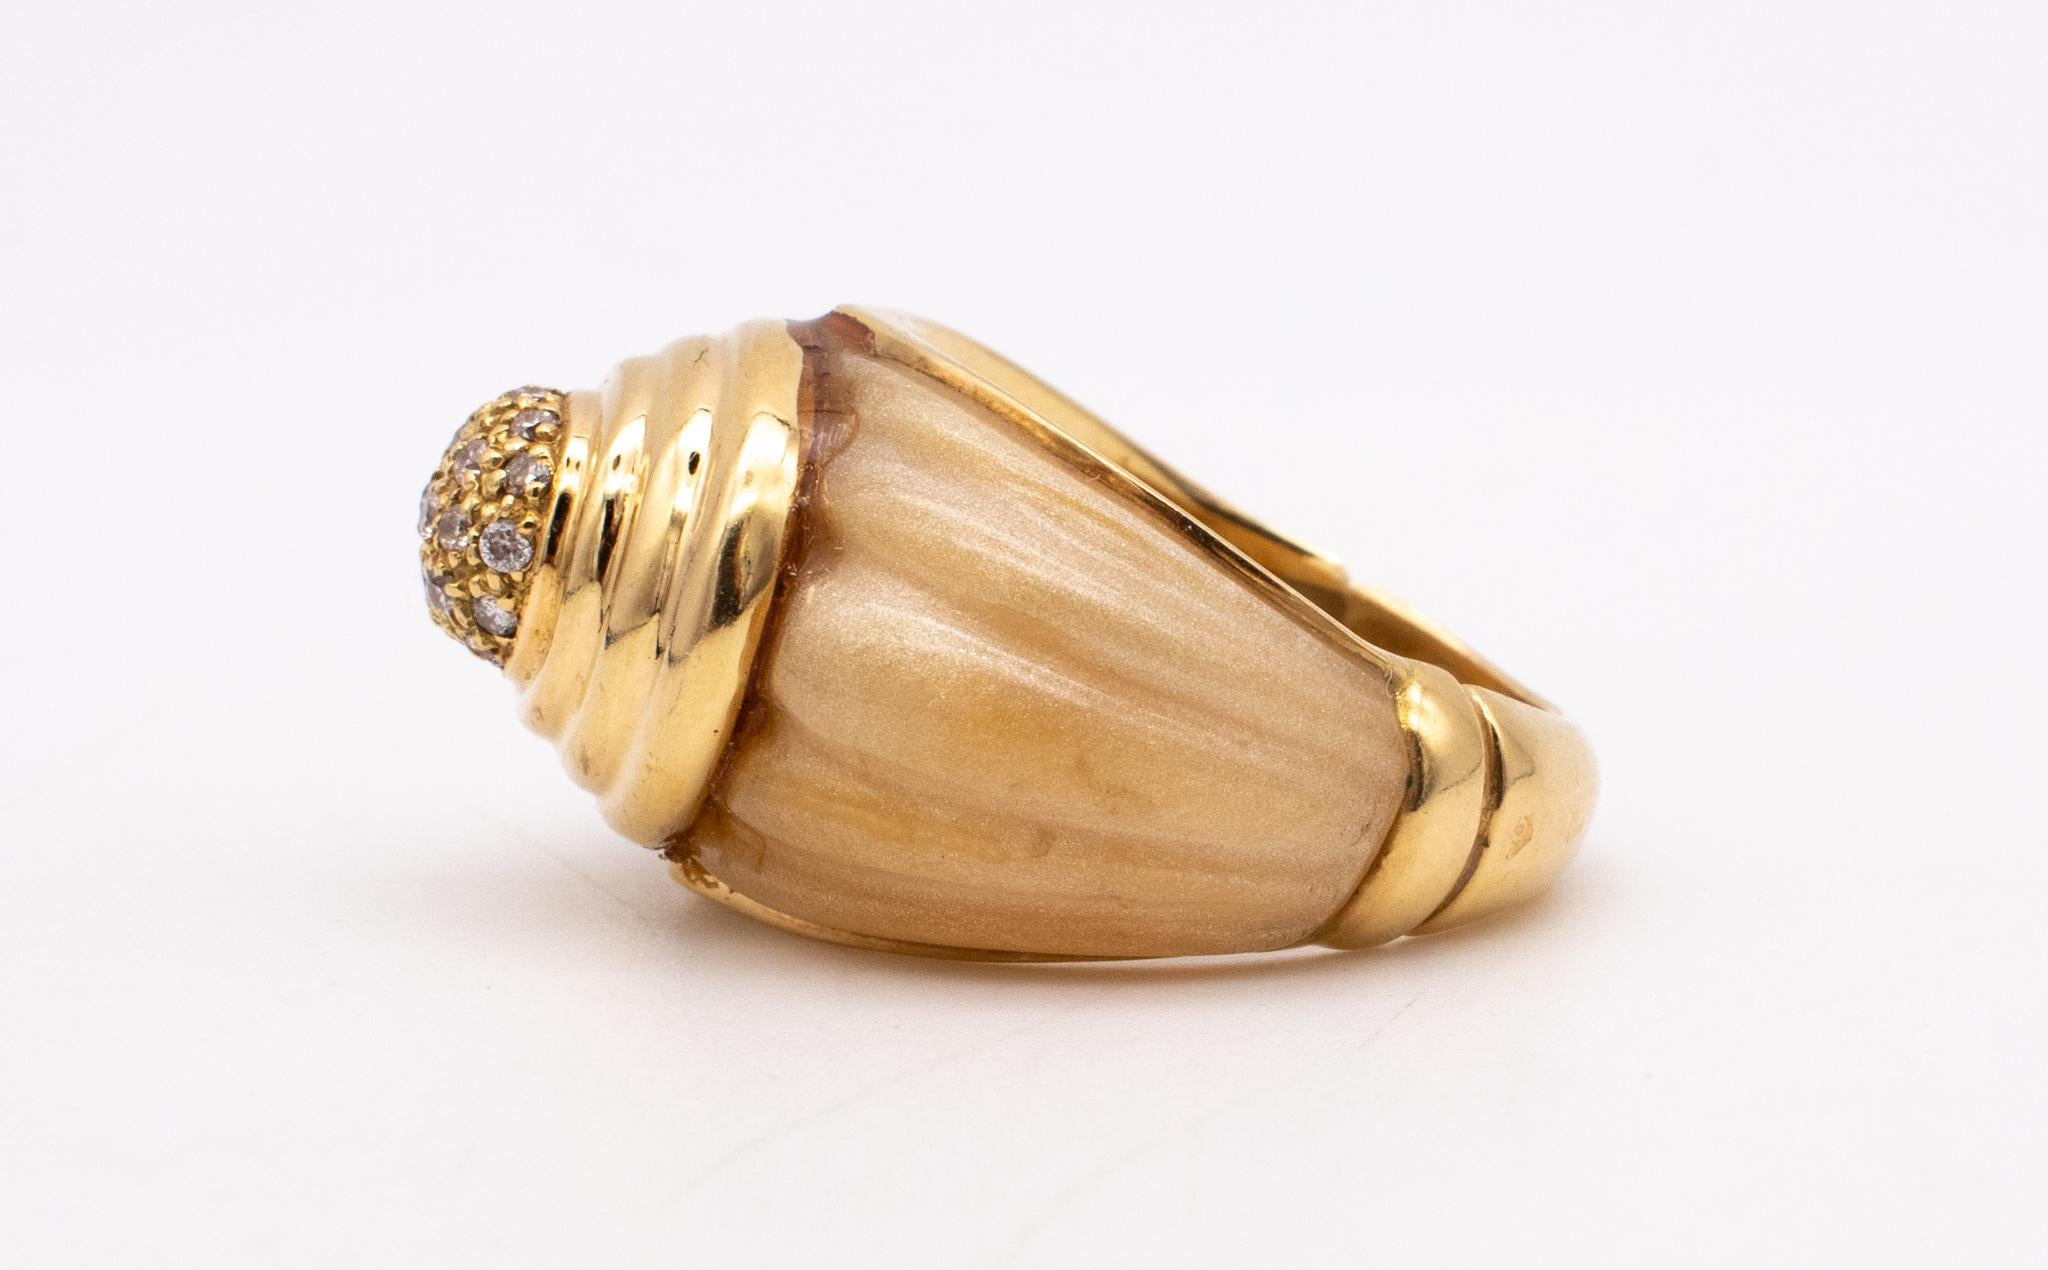 A French deco cocktail ring.

Beautiful piece, made in Paris France during the post-war period, circa 1960. This cocktail ring was crafted in yellow gold of 18 karats yellow and embellished with a fluted scalloped shank carved from amber